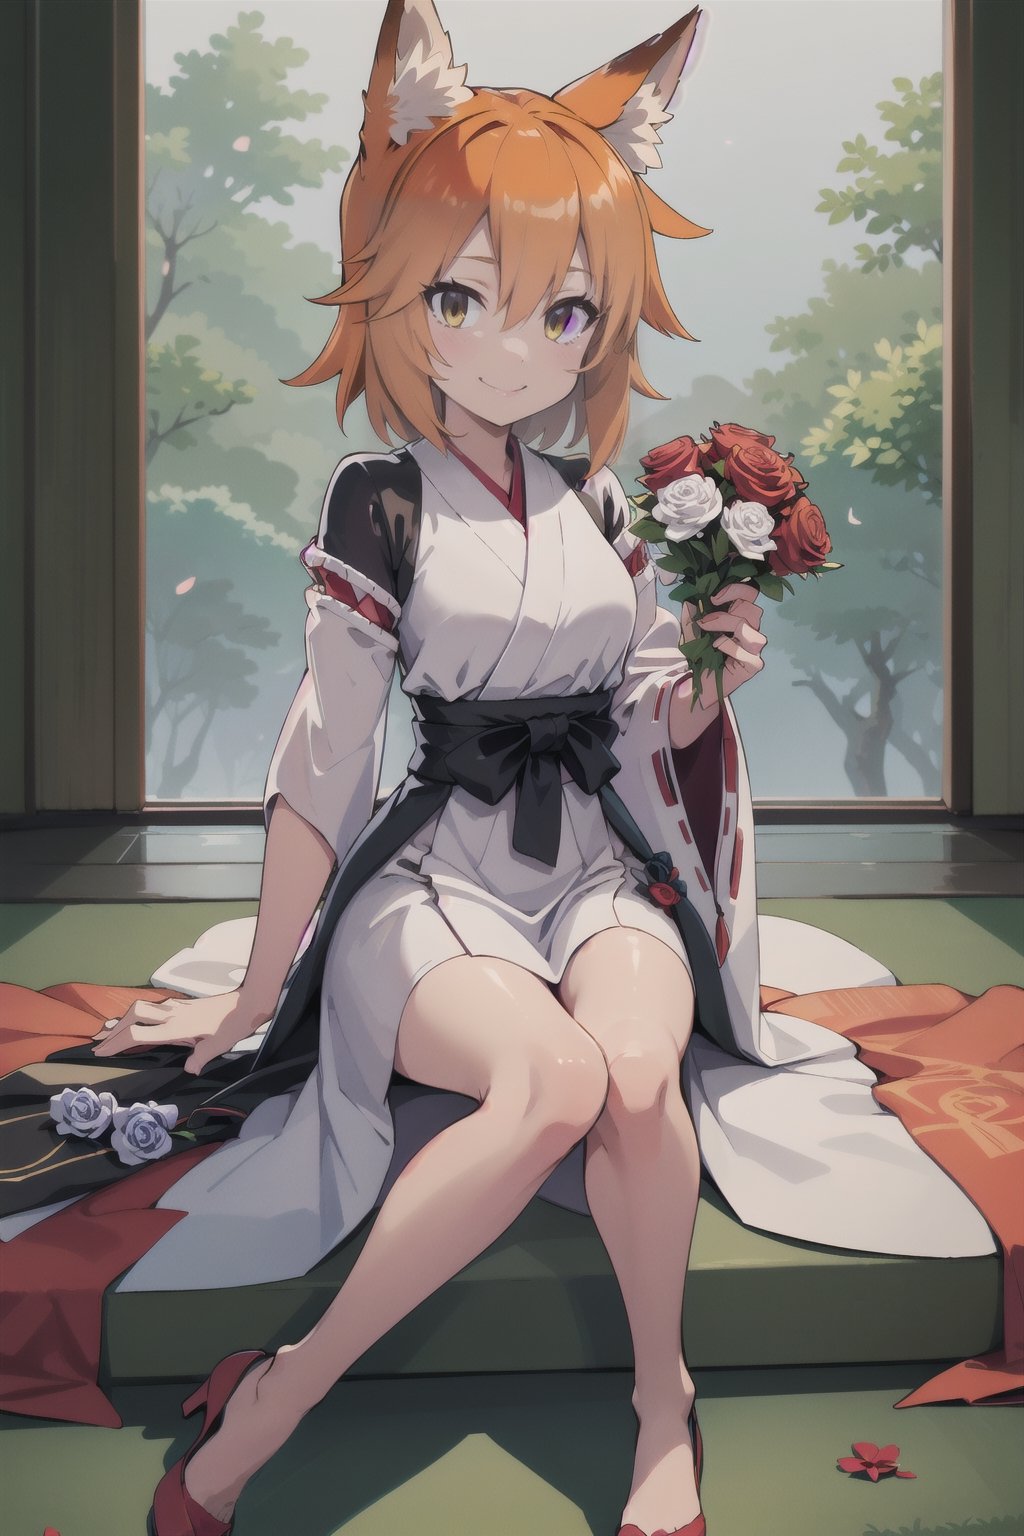 masterpiece, full_body, Senko, bouquet_roses_in_hand, smiling, sitting_down, best quality